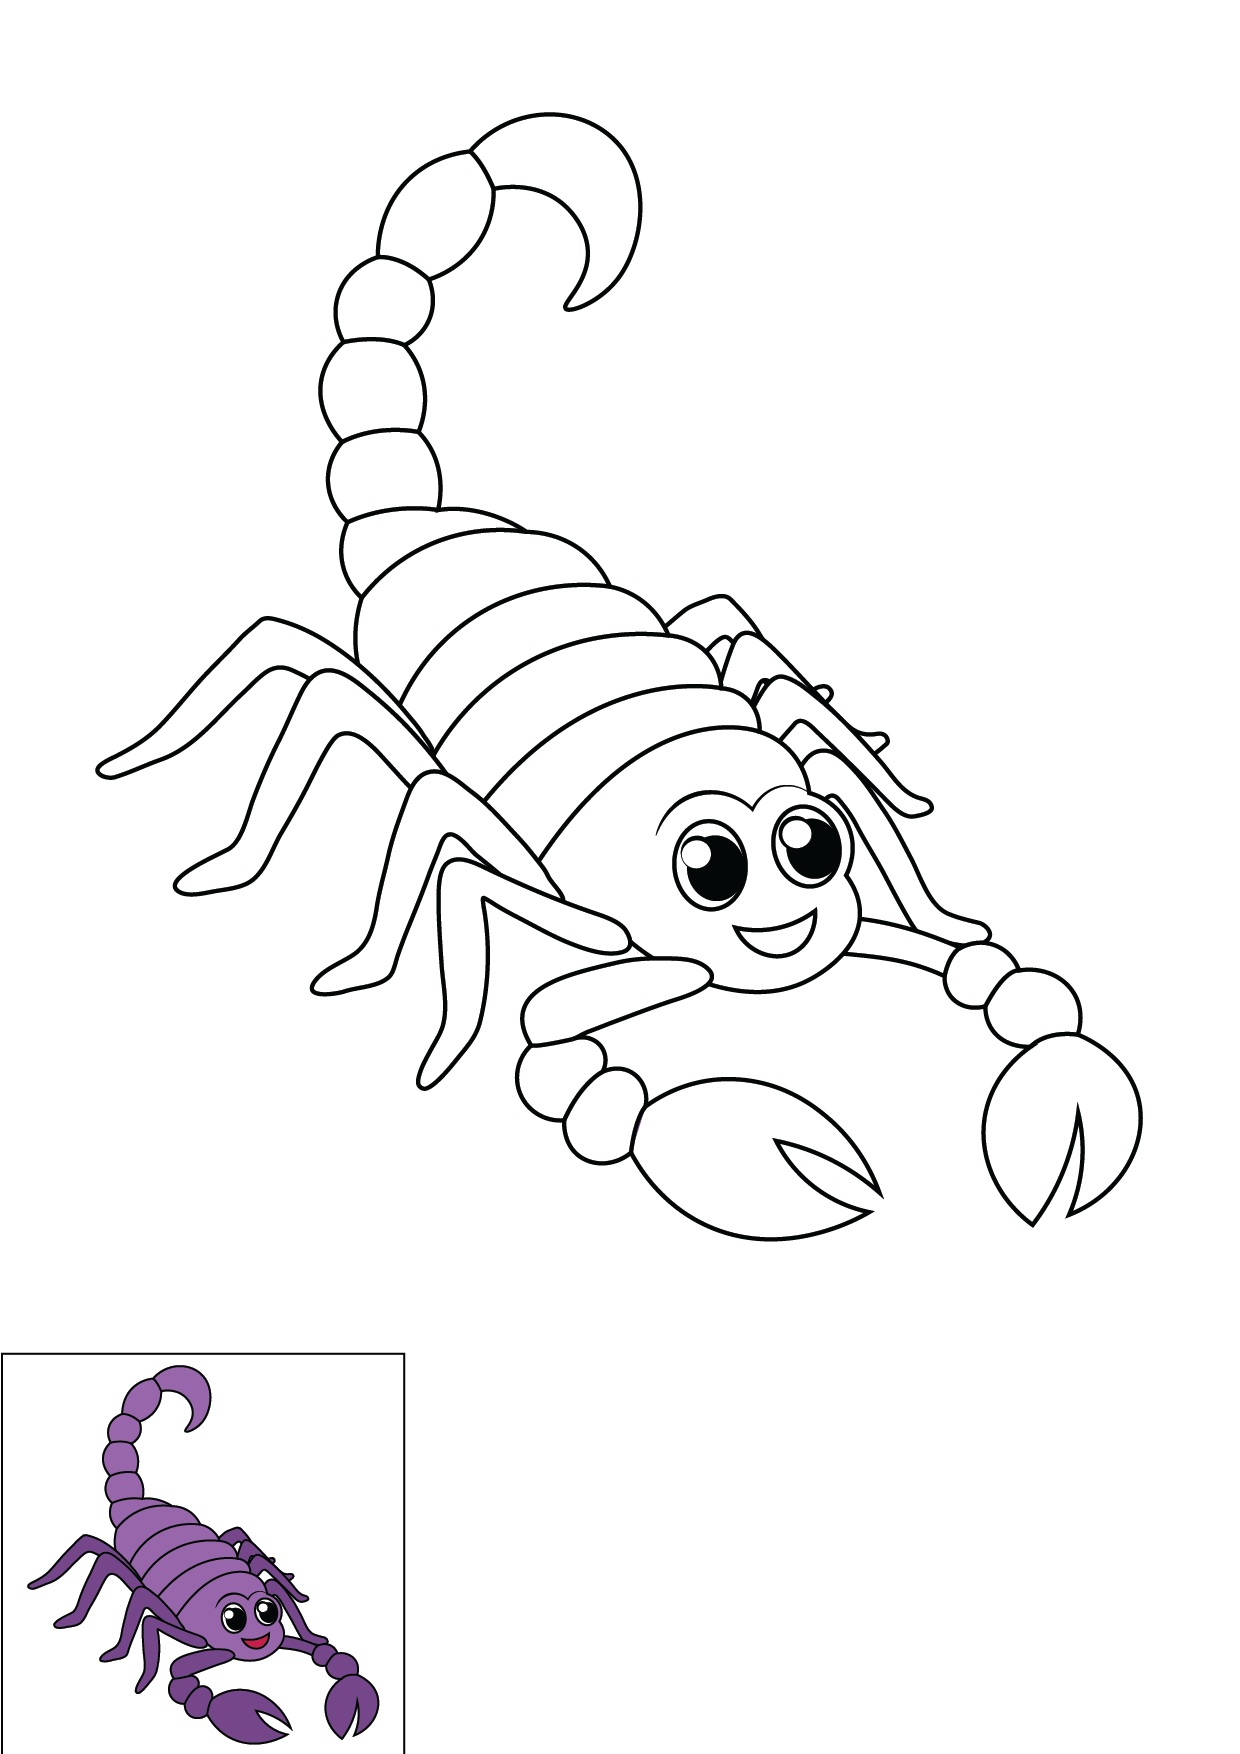 How to Draw A Scorpion Step by Step Printable Color